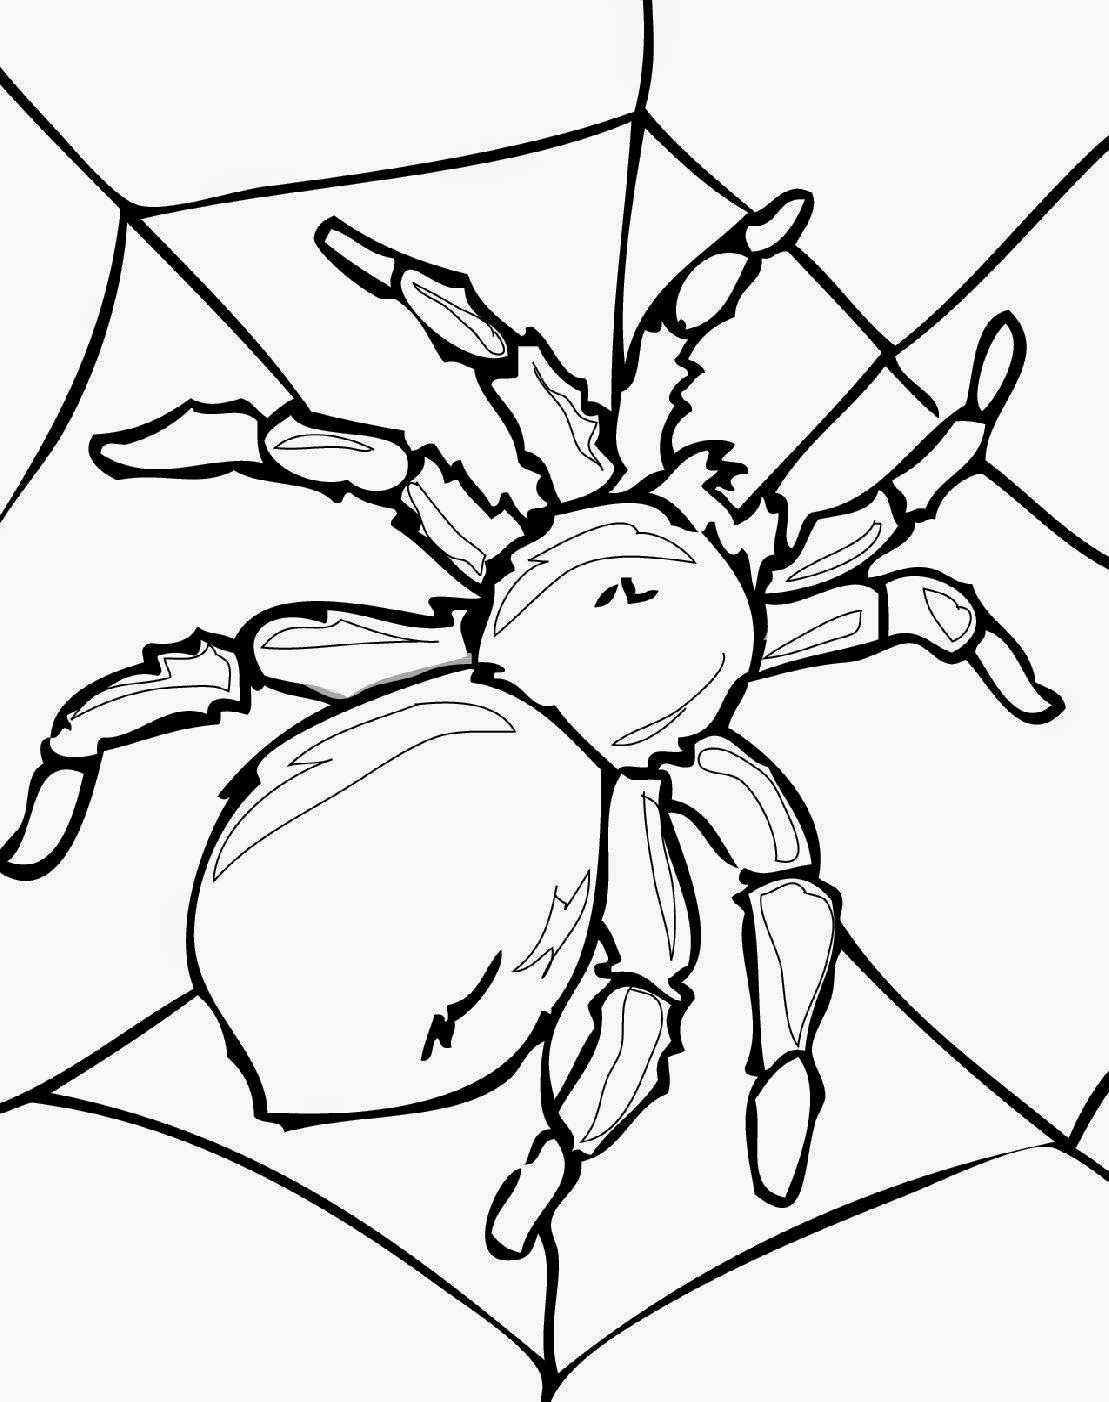 Insect Coloring Sheets | Free Coloring Sheet